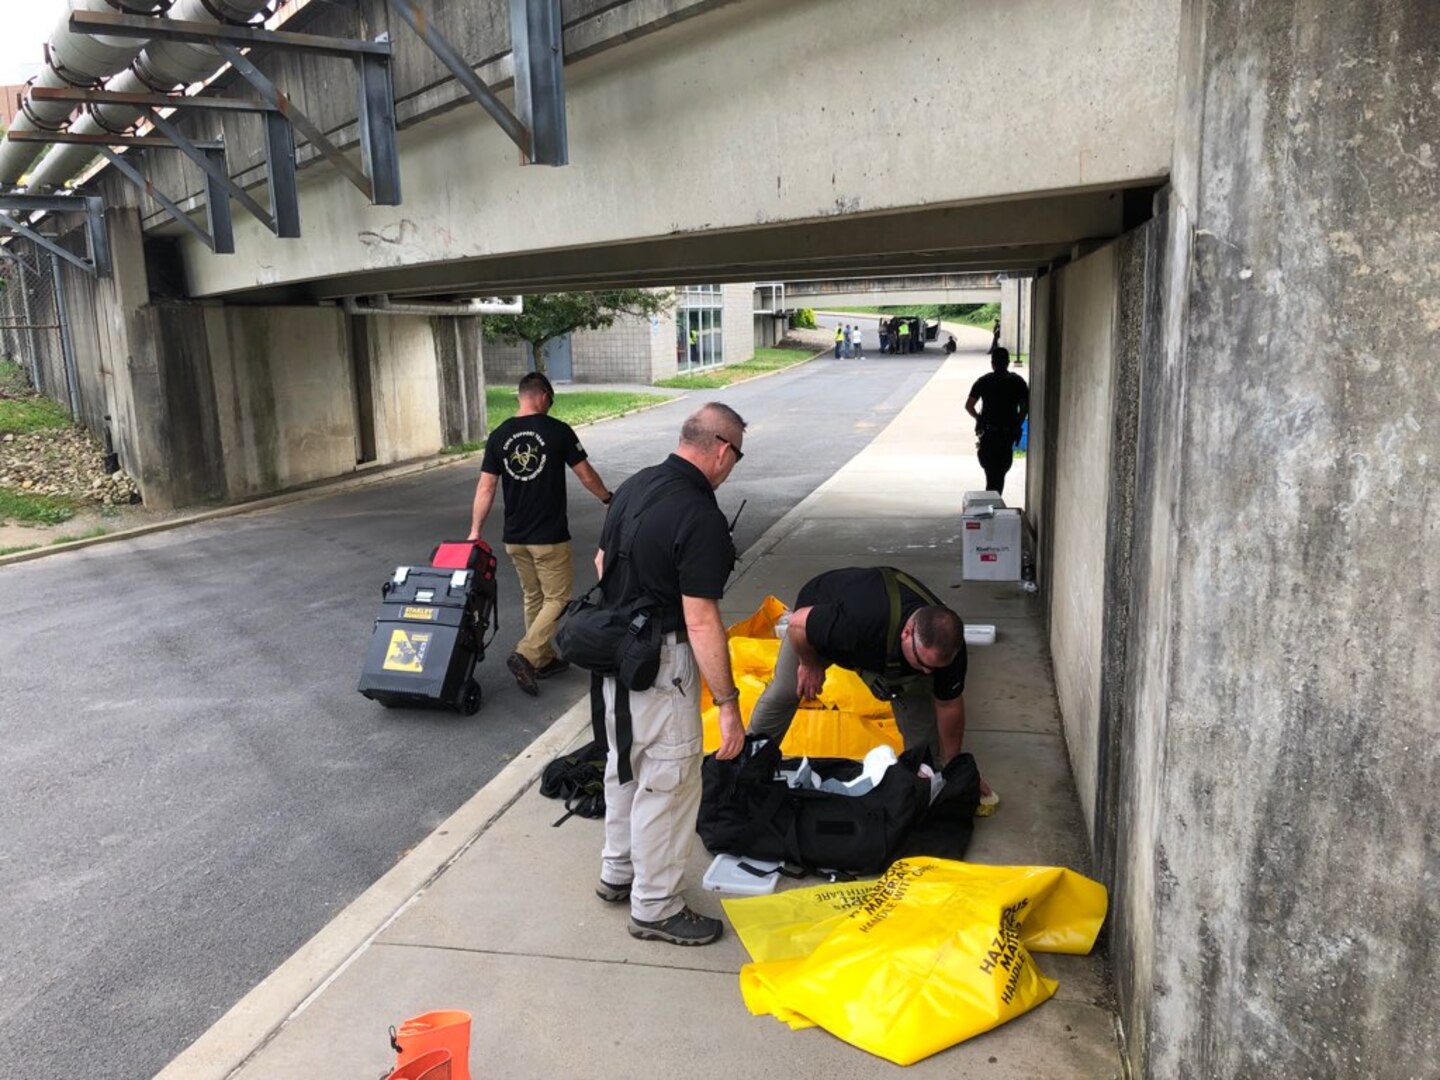 A member of the West Virginia National Guard's 35th Civil Support Team (Weapons of Mass Destruction) prepares equipment alongside support agency personnel May 29, 2019, during Operation Rough Ride, a West Virginia University full-scale exercise involving more than 150 participants from 25 departments/units representing 18 organizations from campus, local, state and federal agencies. The exercise, which was sponsored by the WVU Police Department and WVU Office of Emergency Management, provided participants with an opportunity to assess capabilities, plans, policies and procedures, with a focus on decision-making, coordination, and integration between multiple agencies. (Courtesy photo)